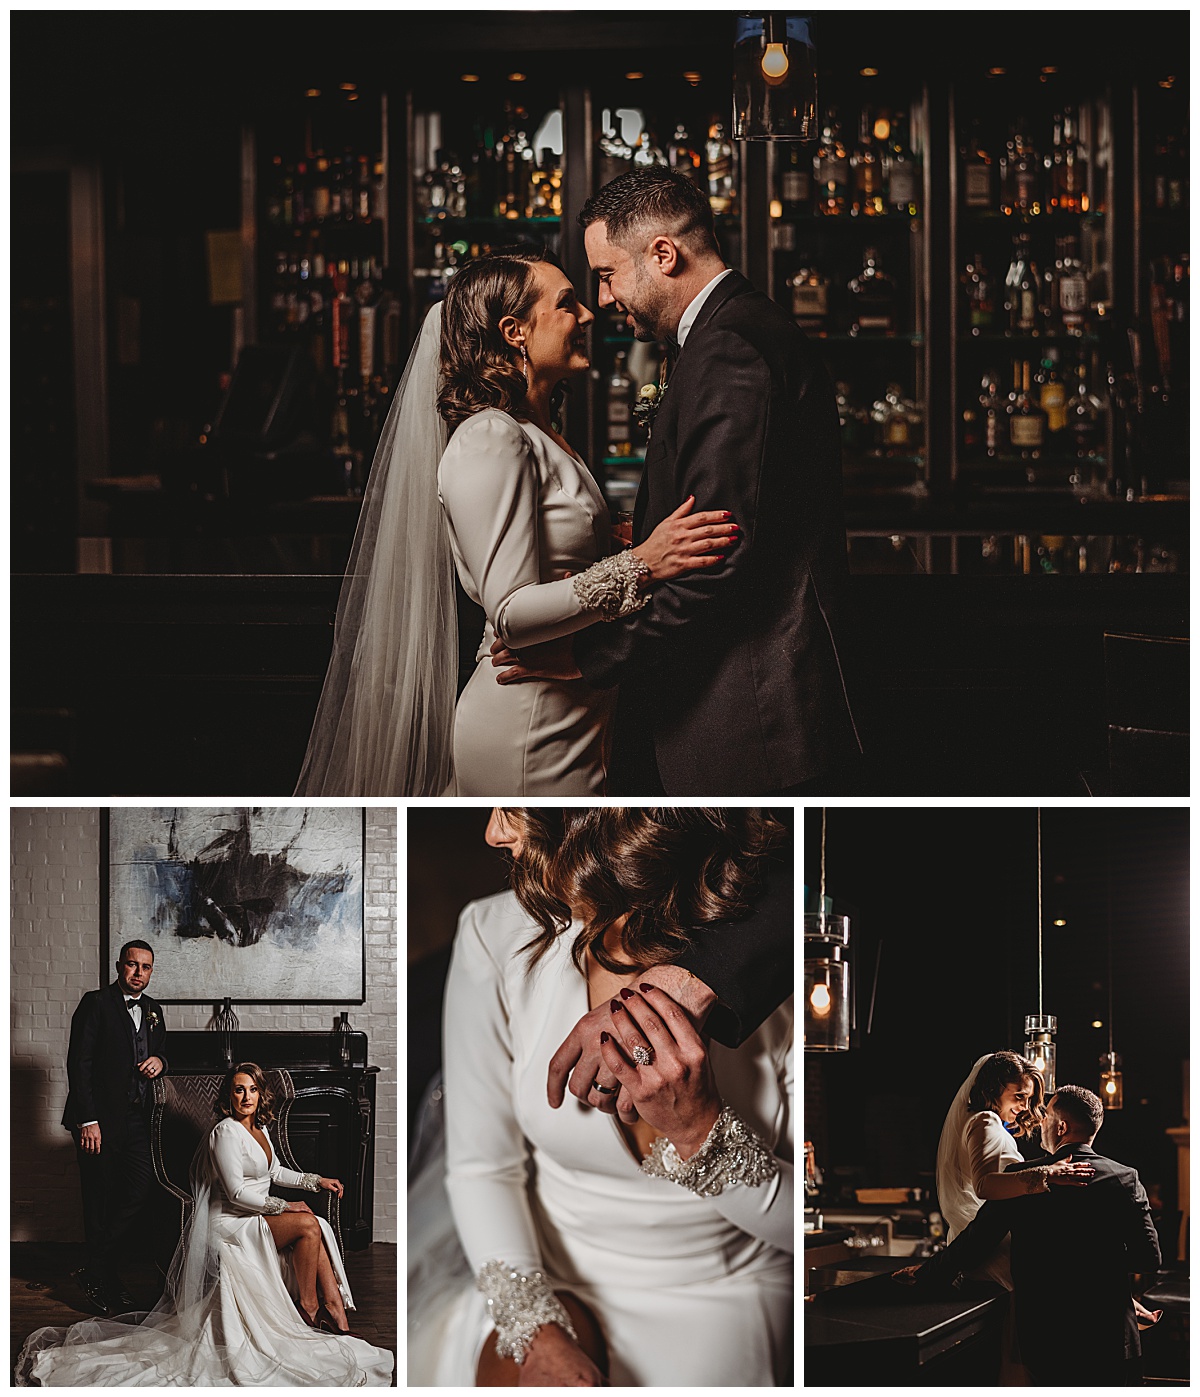 Bride and groom portraits in a vintage bar for a moody winter wedding in Baltimore by Brittany Dunbar Photography, a Baltimore Wedding Photographer.